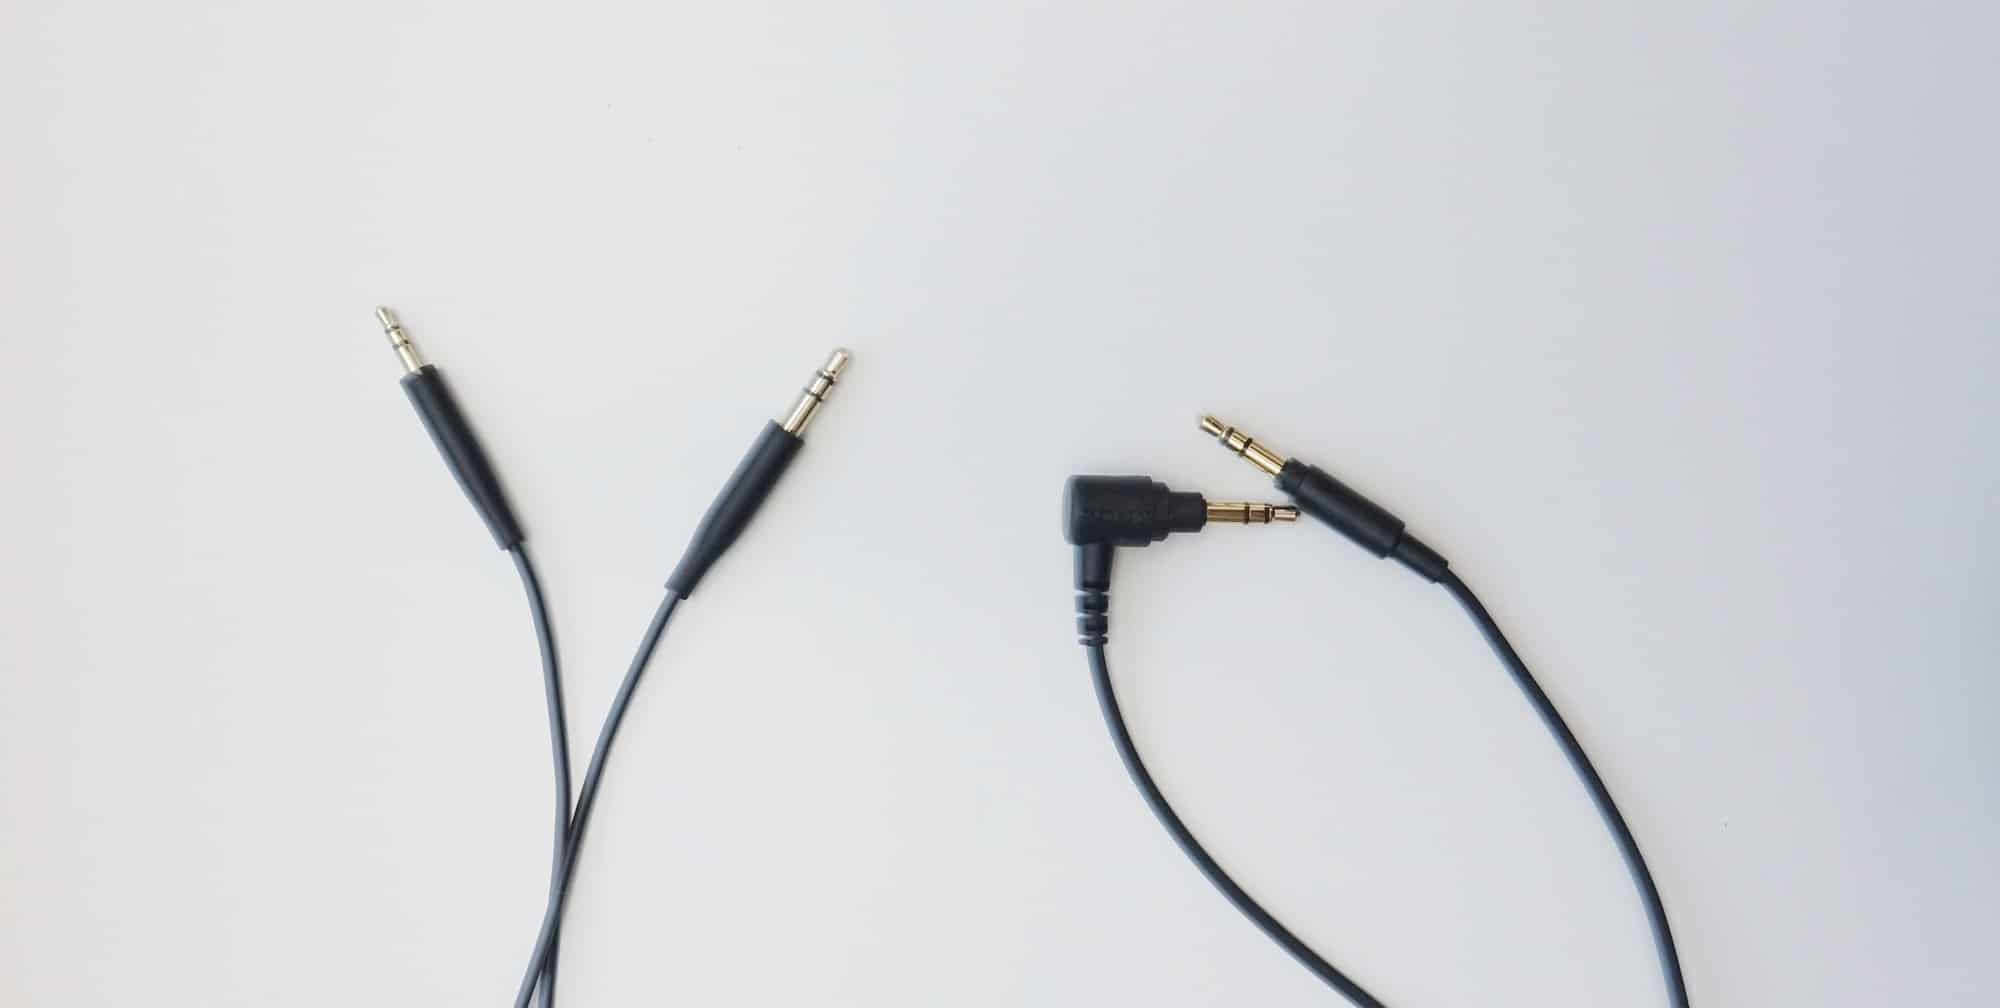 The Bose 700 uses a 2.5mm to 3.5mm cable (left) while the Sony uses a 3.5mm to 3.5mm standard cable (right).